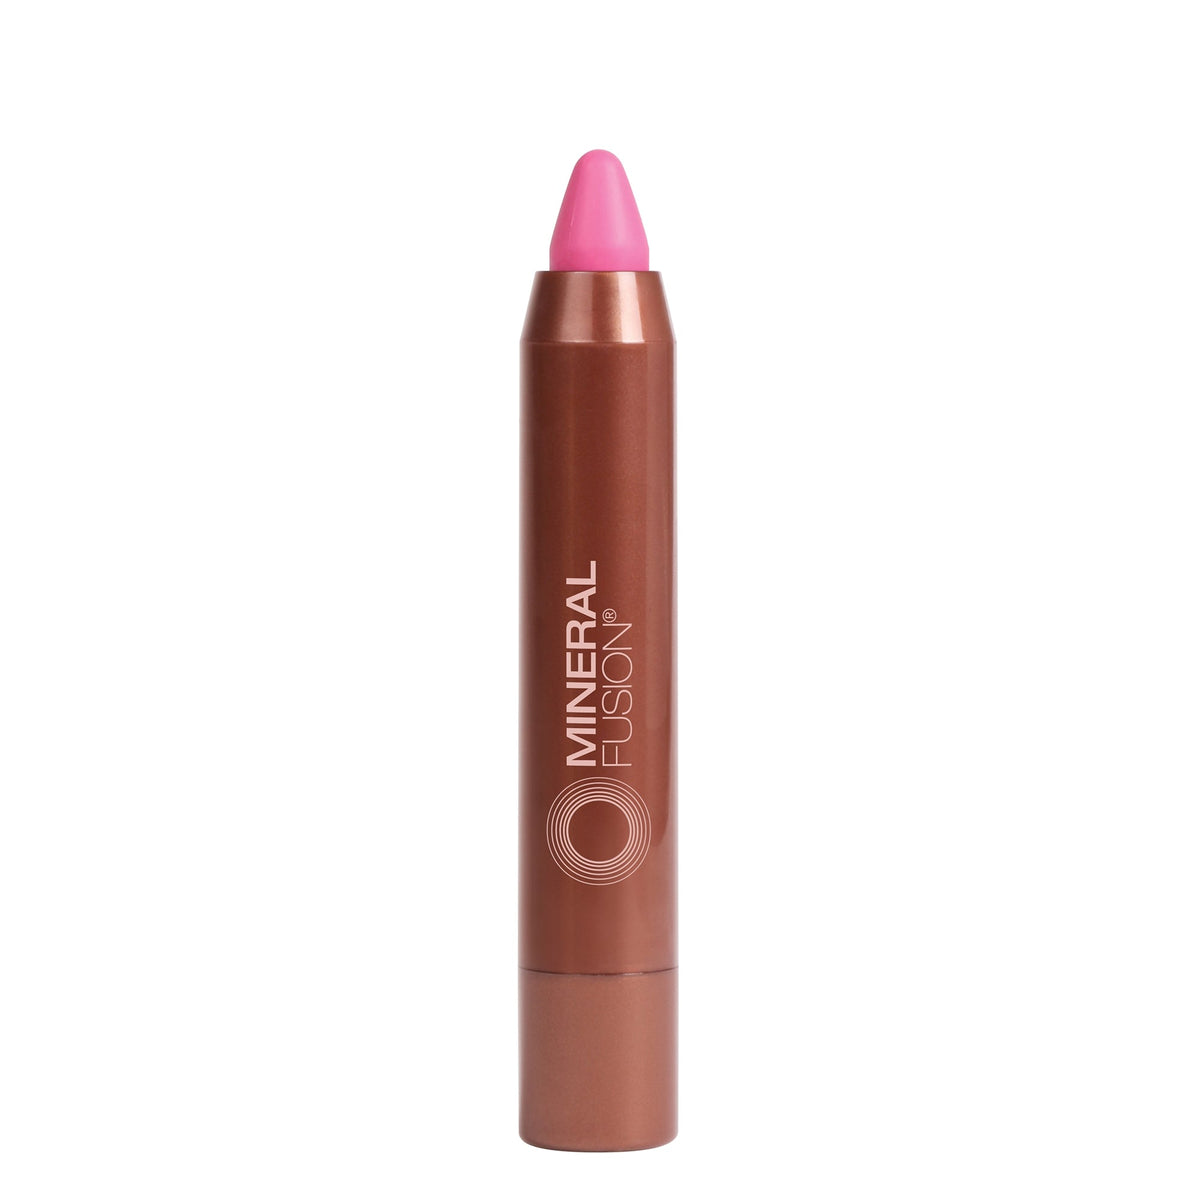 Mineral Fusion - Sheer Moisture Lip Tint - Glow- bright pink / .10 oz - by Mineral Fusion |ProCare Outlet|